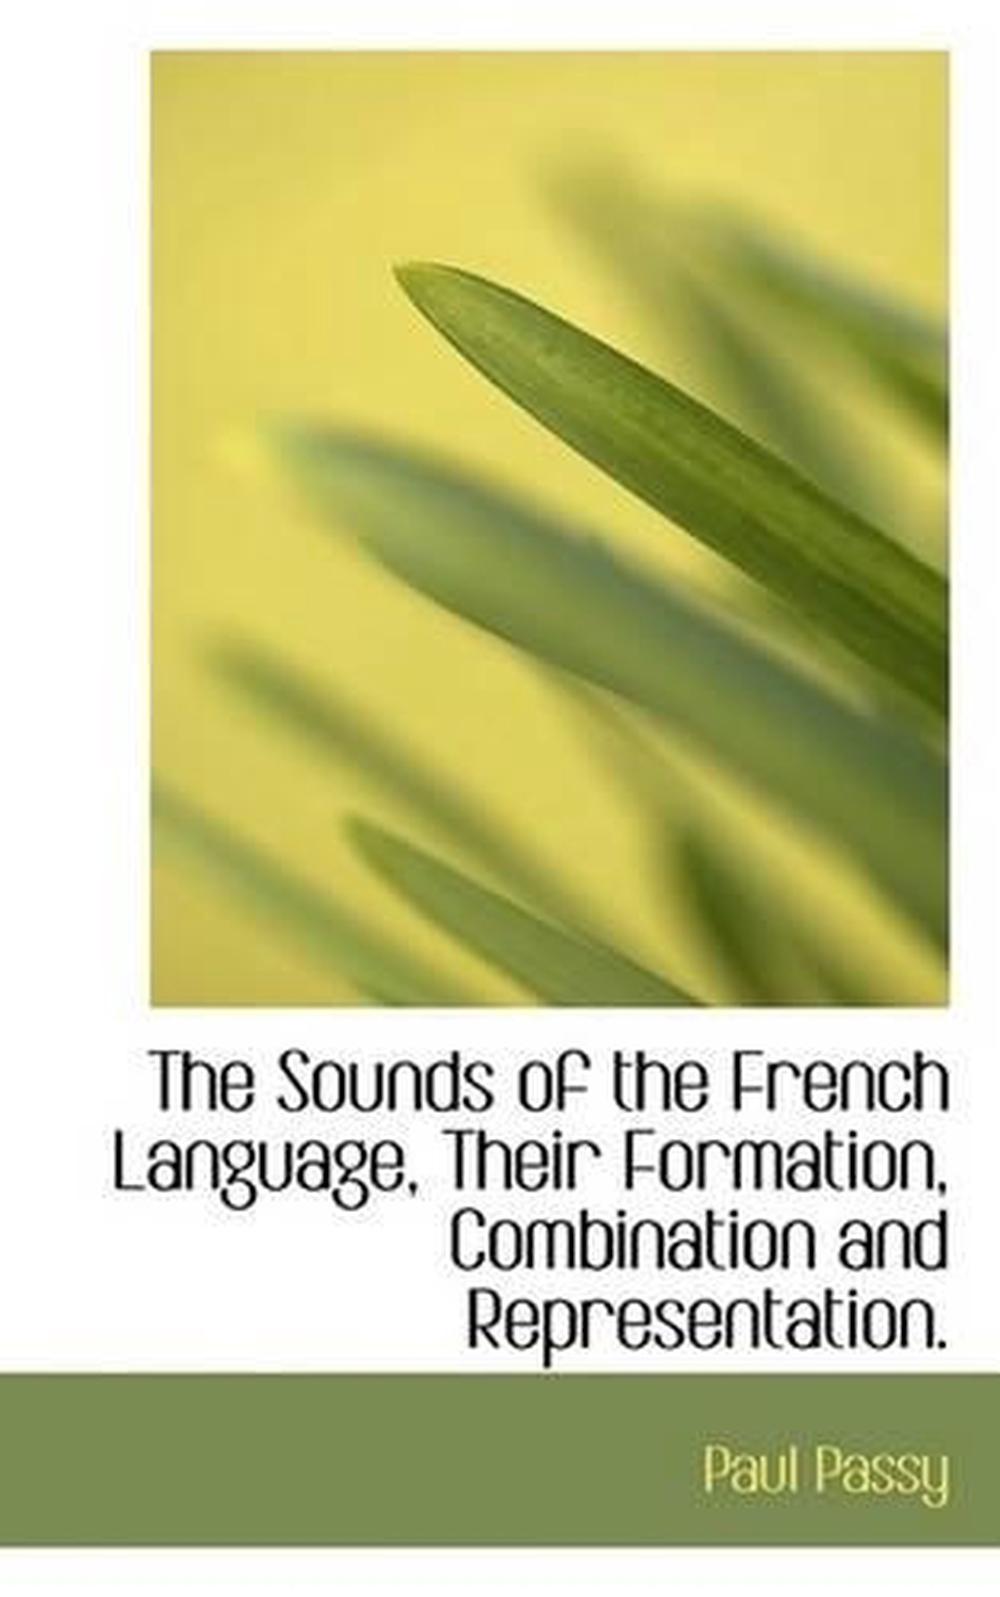 Sounds of the French Language, Their Formation, Combination by Paul ...